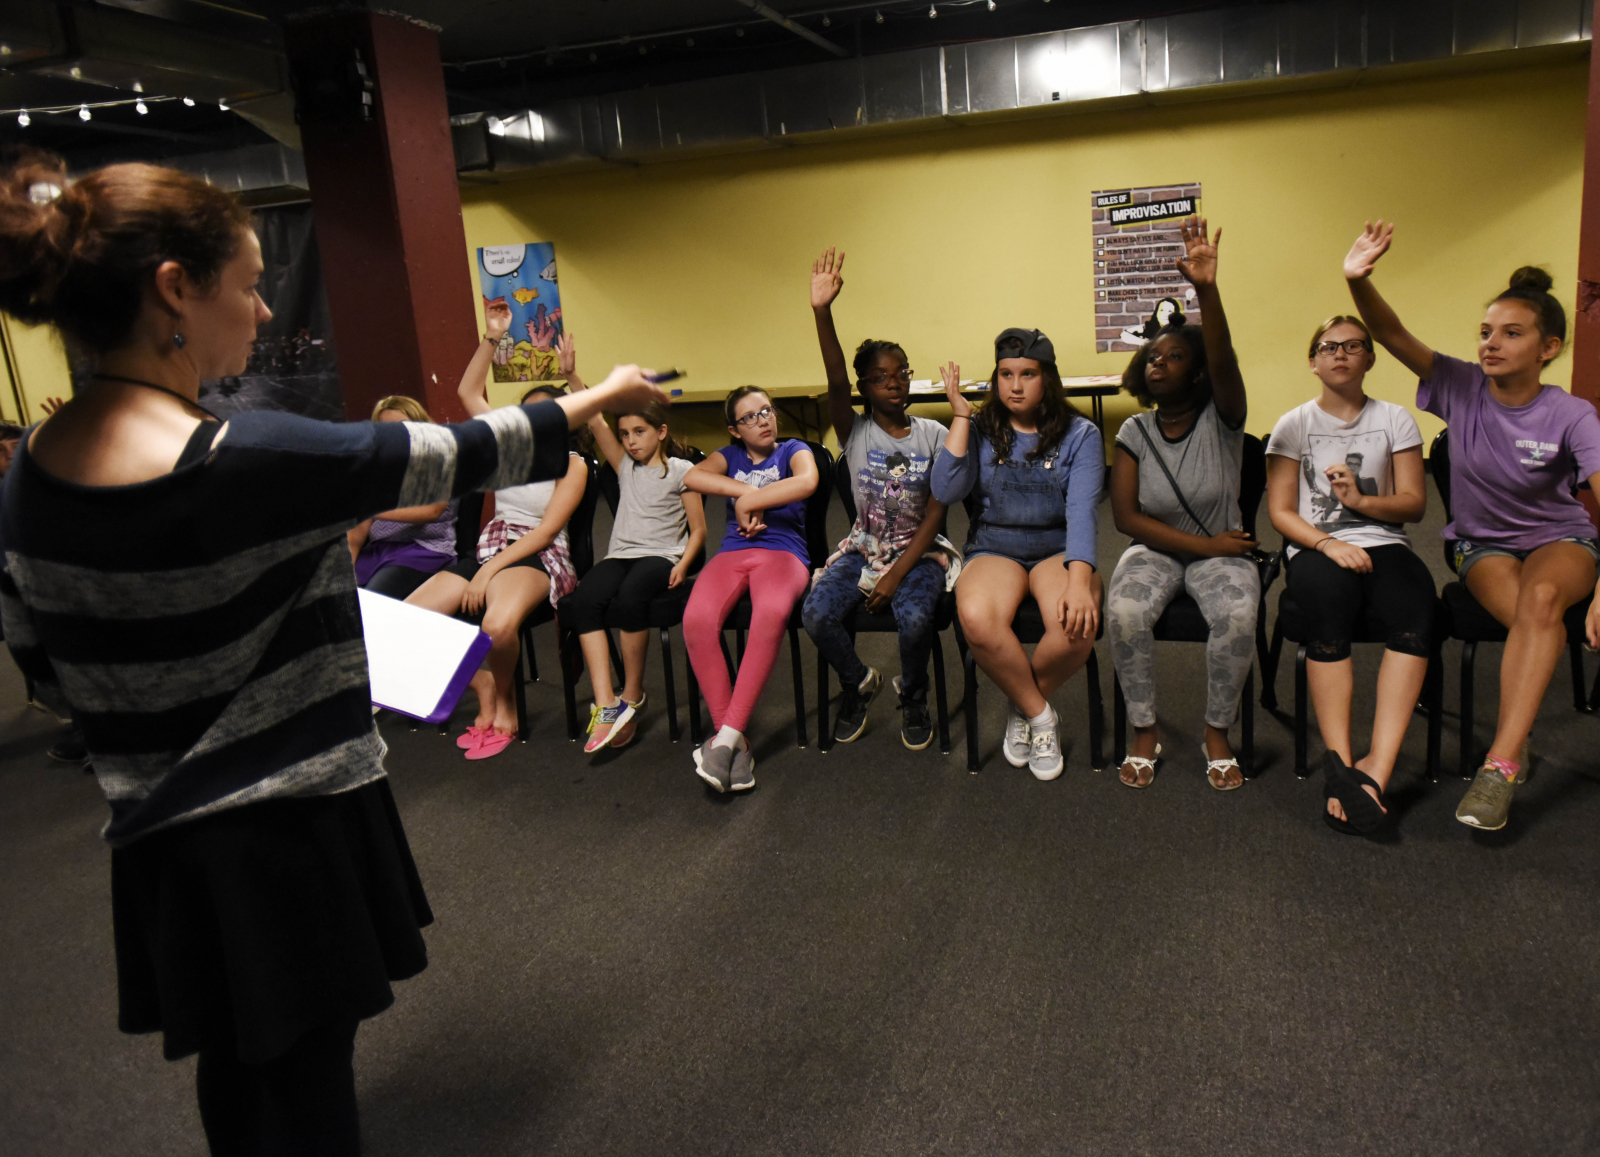 Students from Imagine That! act out words and feelings during the Summer Education Program at Proctors Tuesday, July 25, 2017.